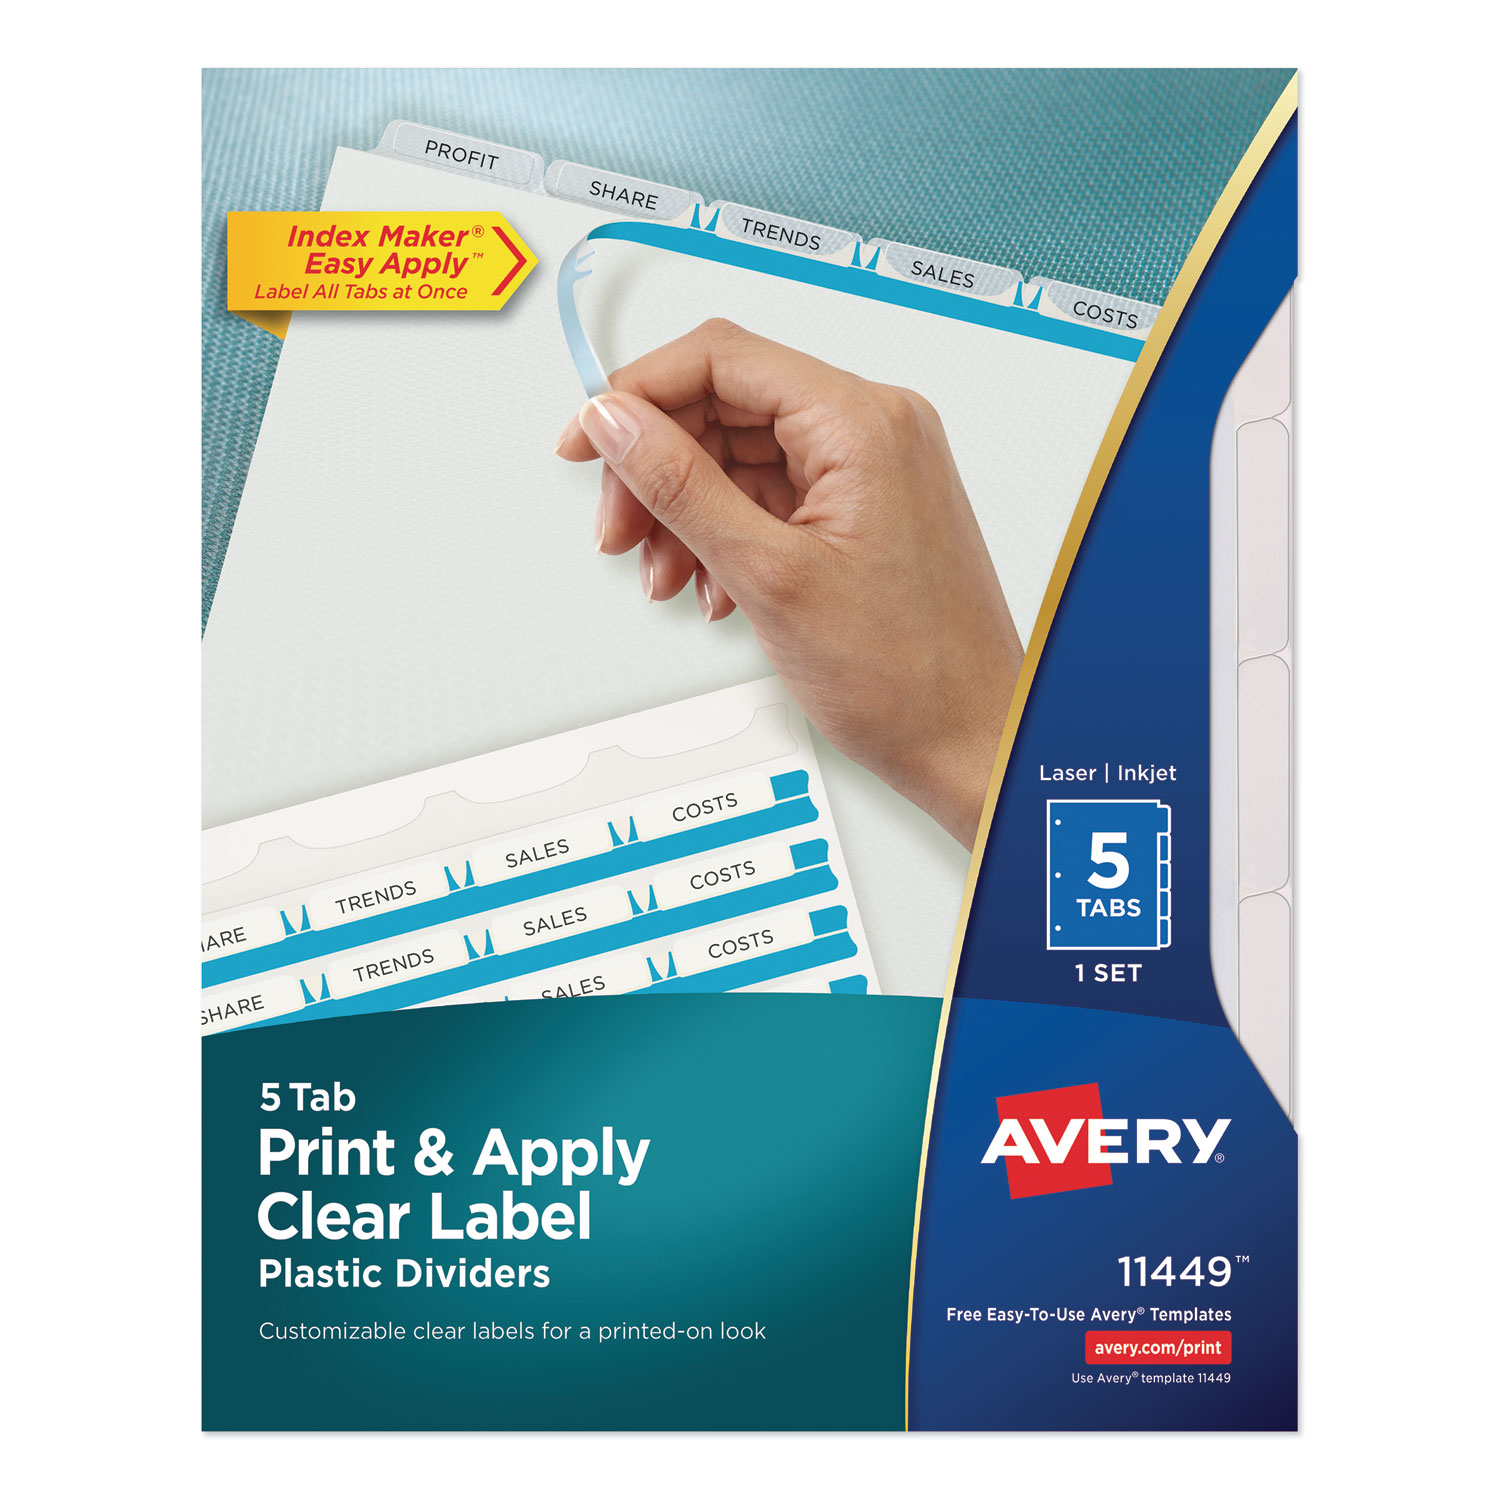  Avery 11449 Print and Apply Index Maker Clear Label Plastic Dividers with Printable Label Strip, 5-Tab, 11 x 8.5, Translucent, 1 Set (AVE11449) 